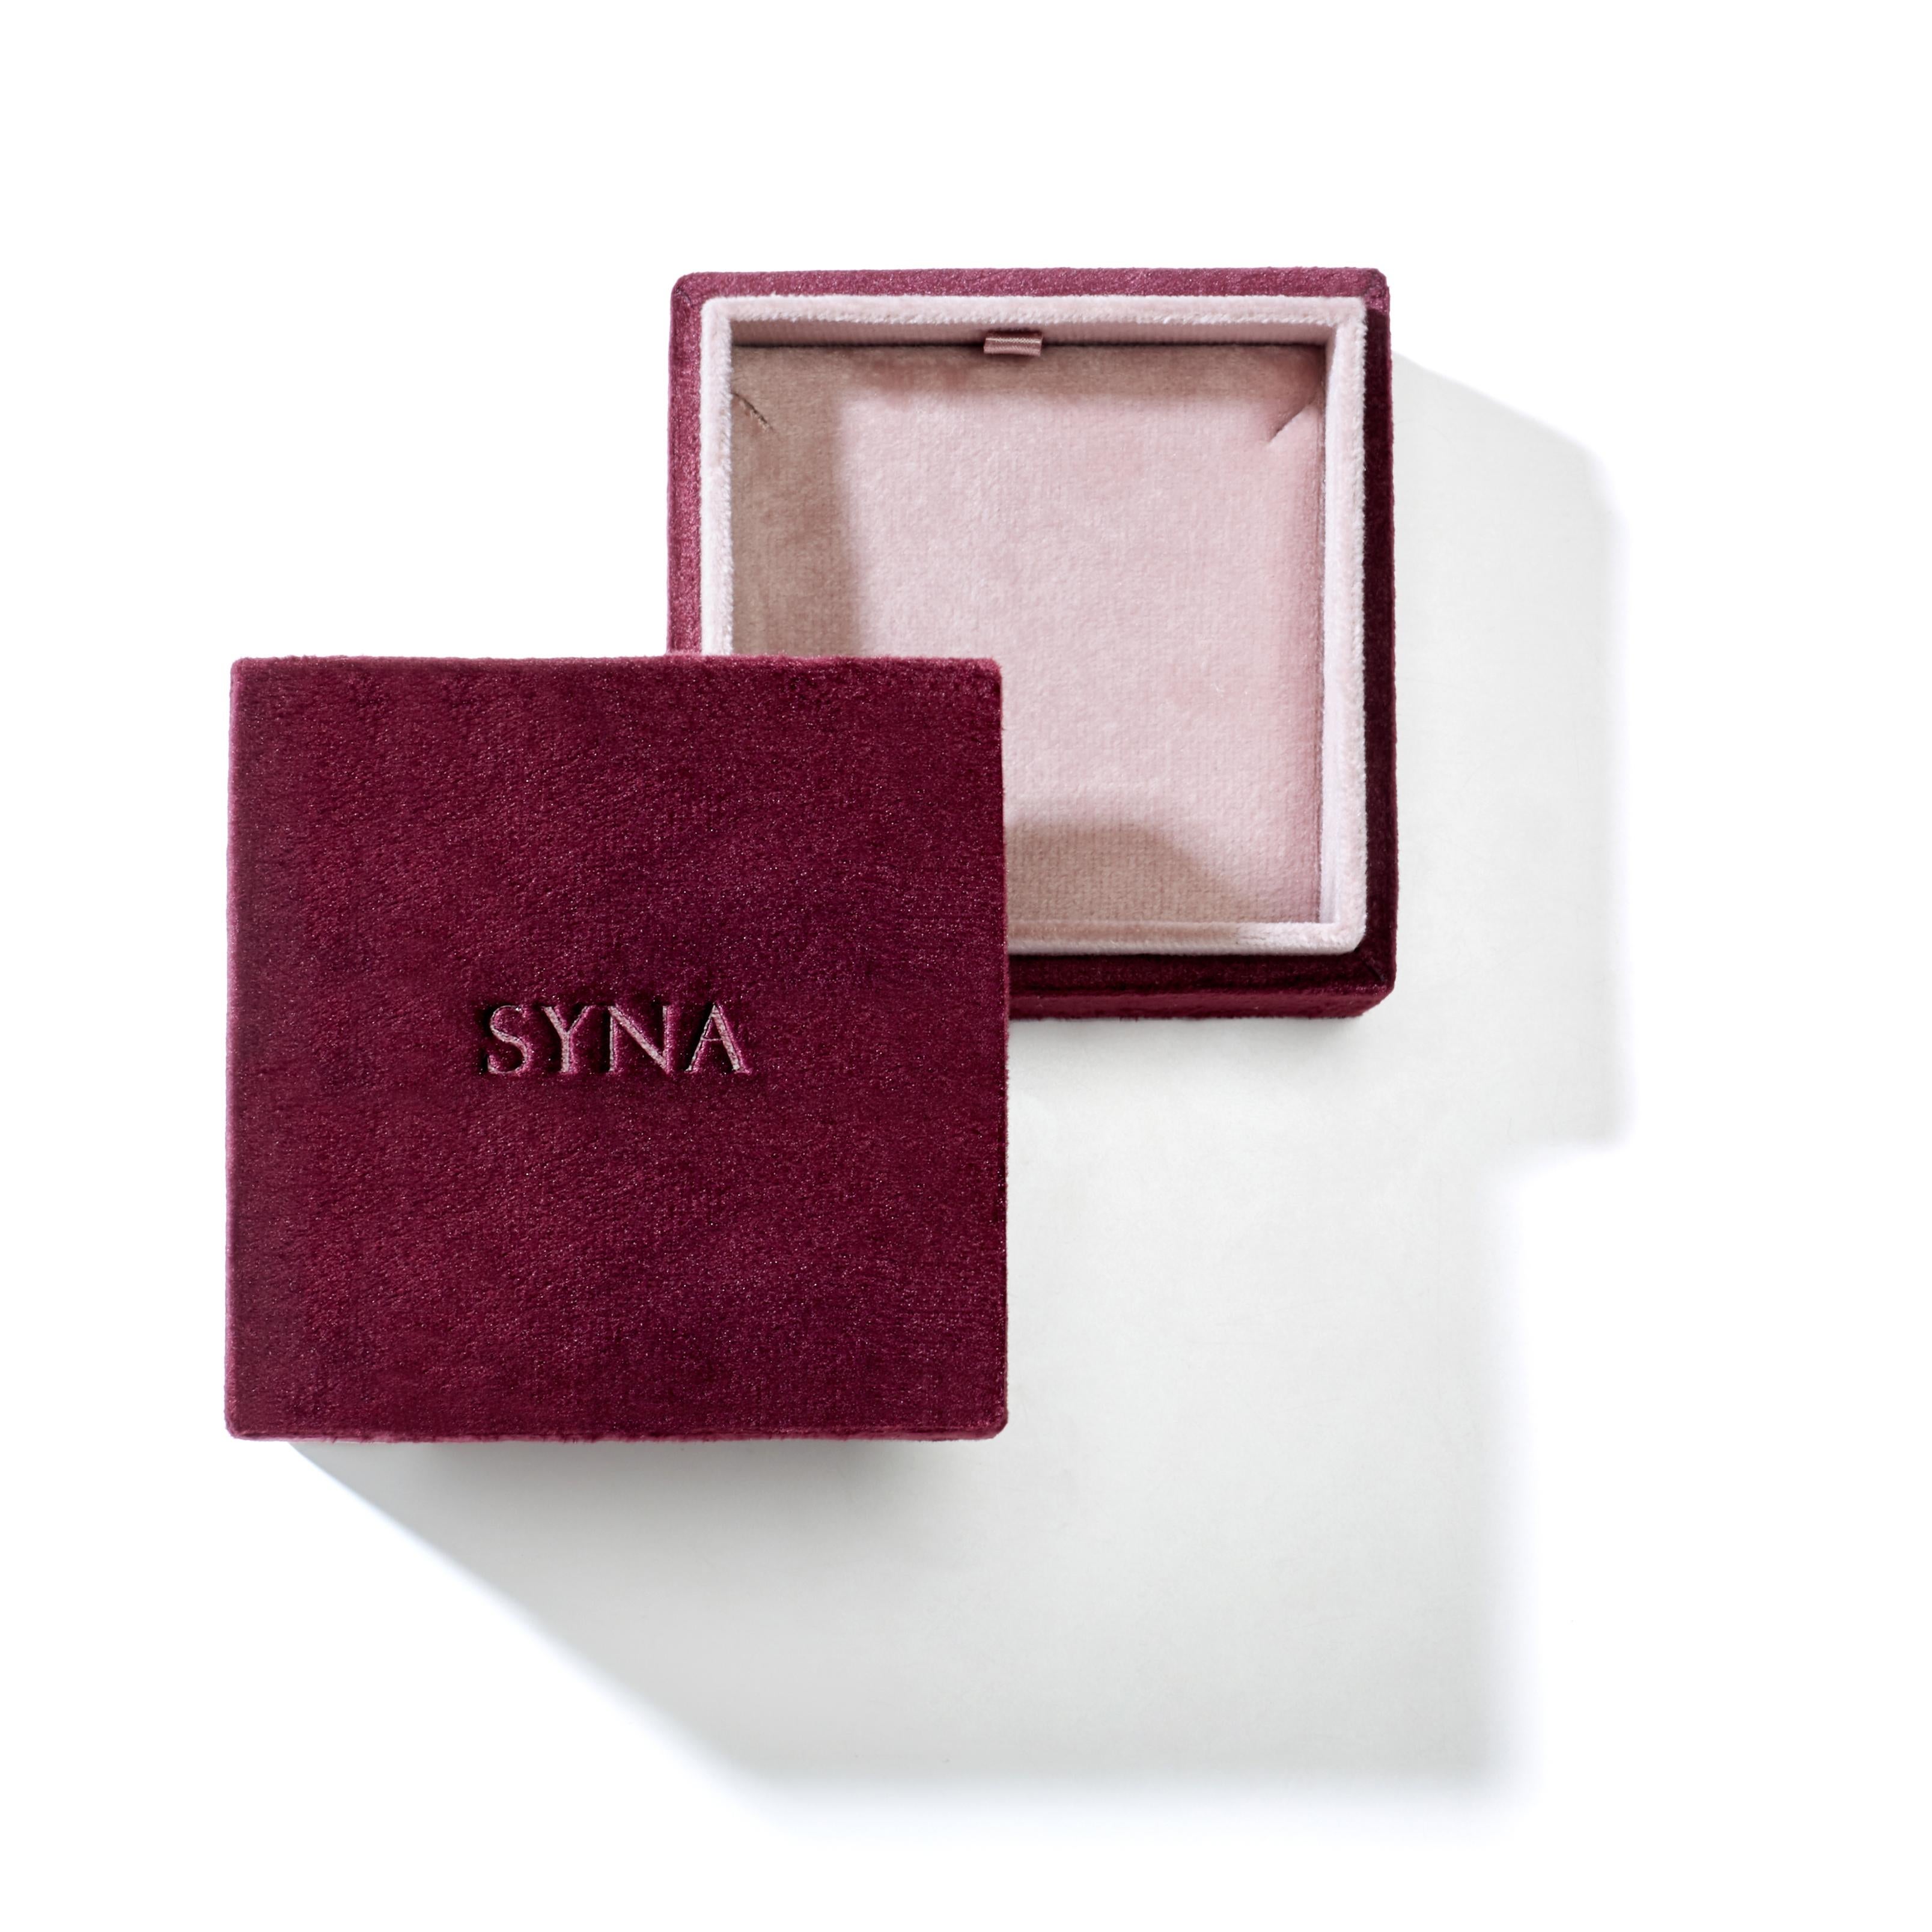 synaworld packaging